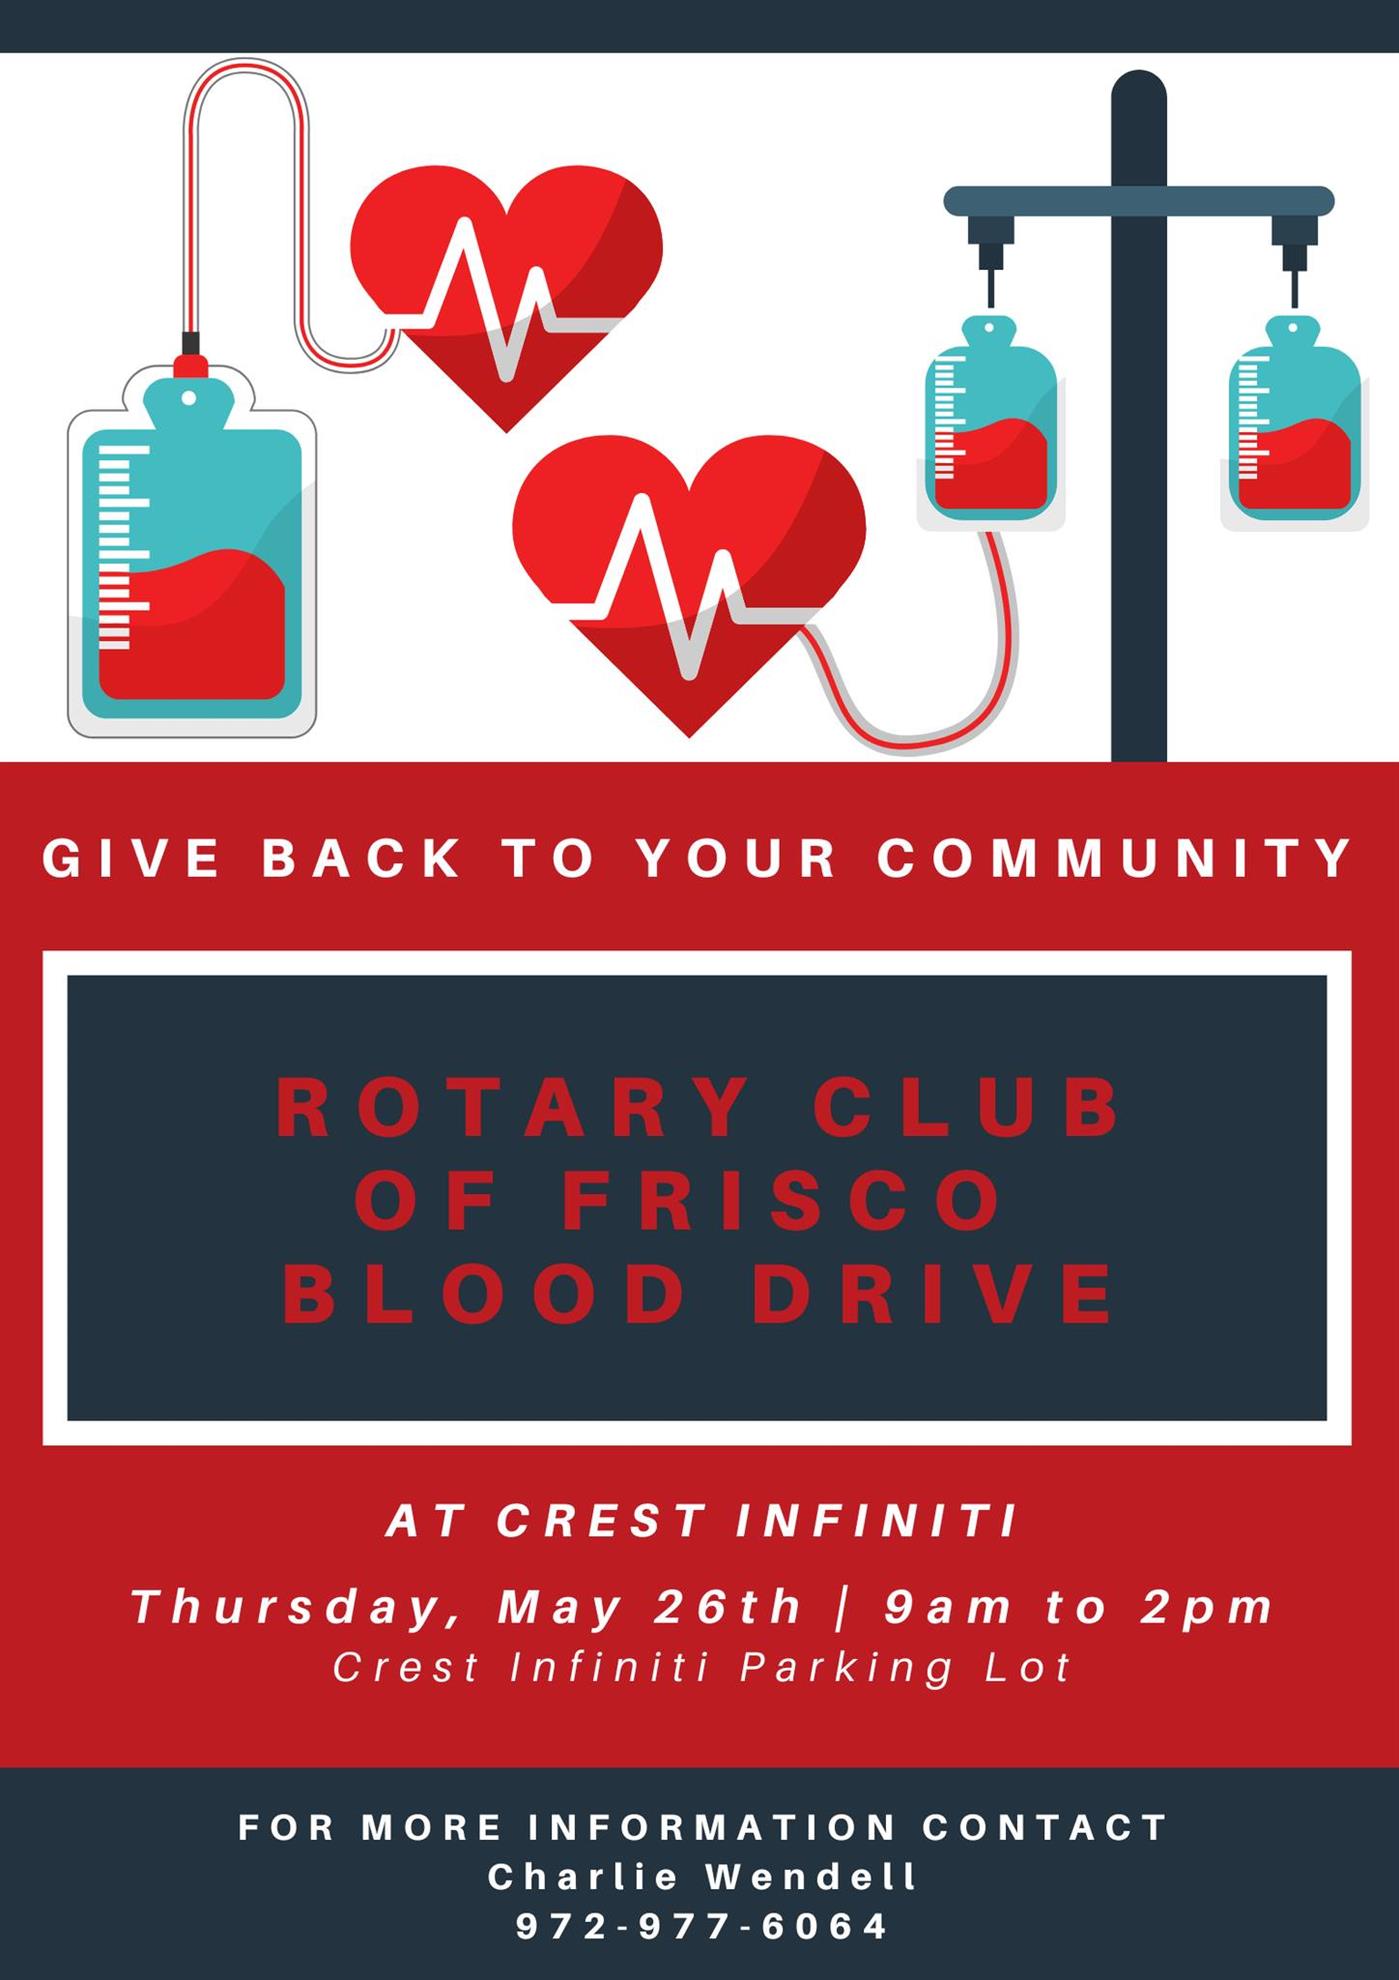 The Rotary Club of Frisco's Blood Drive